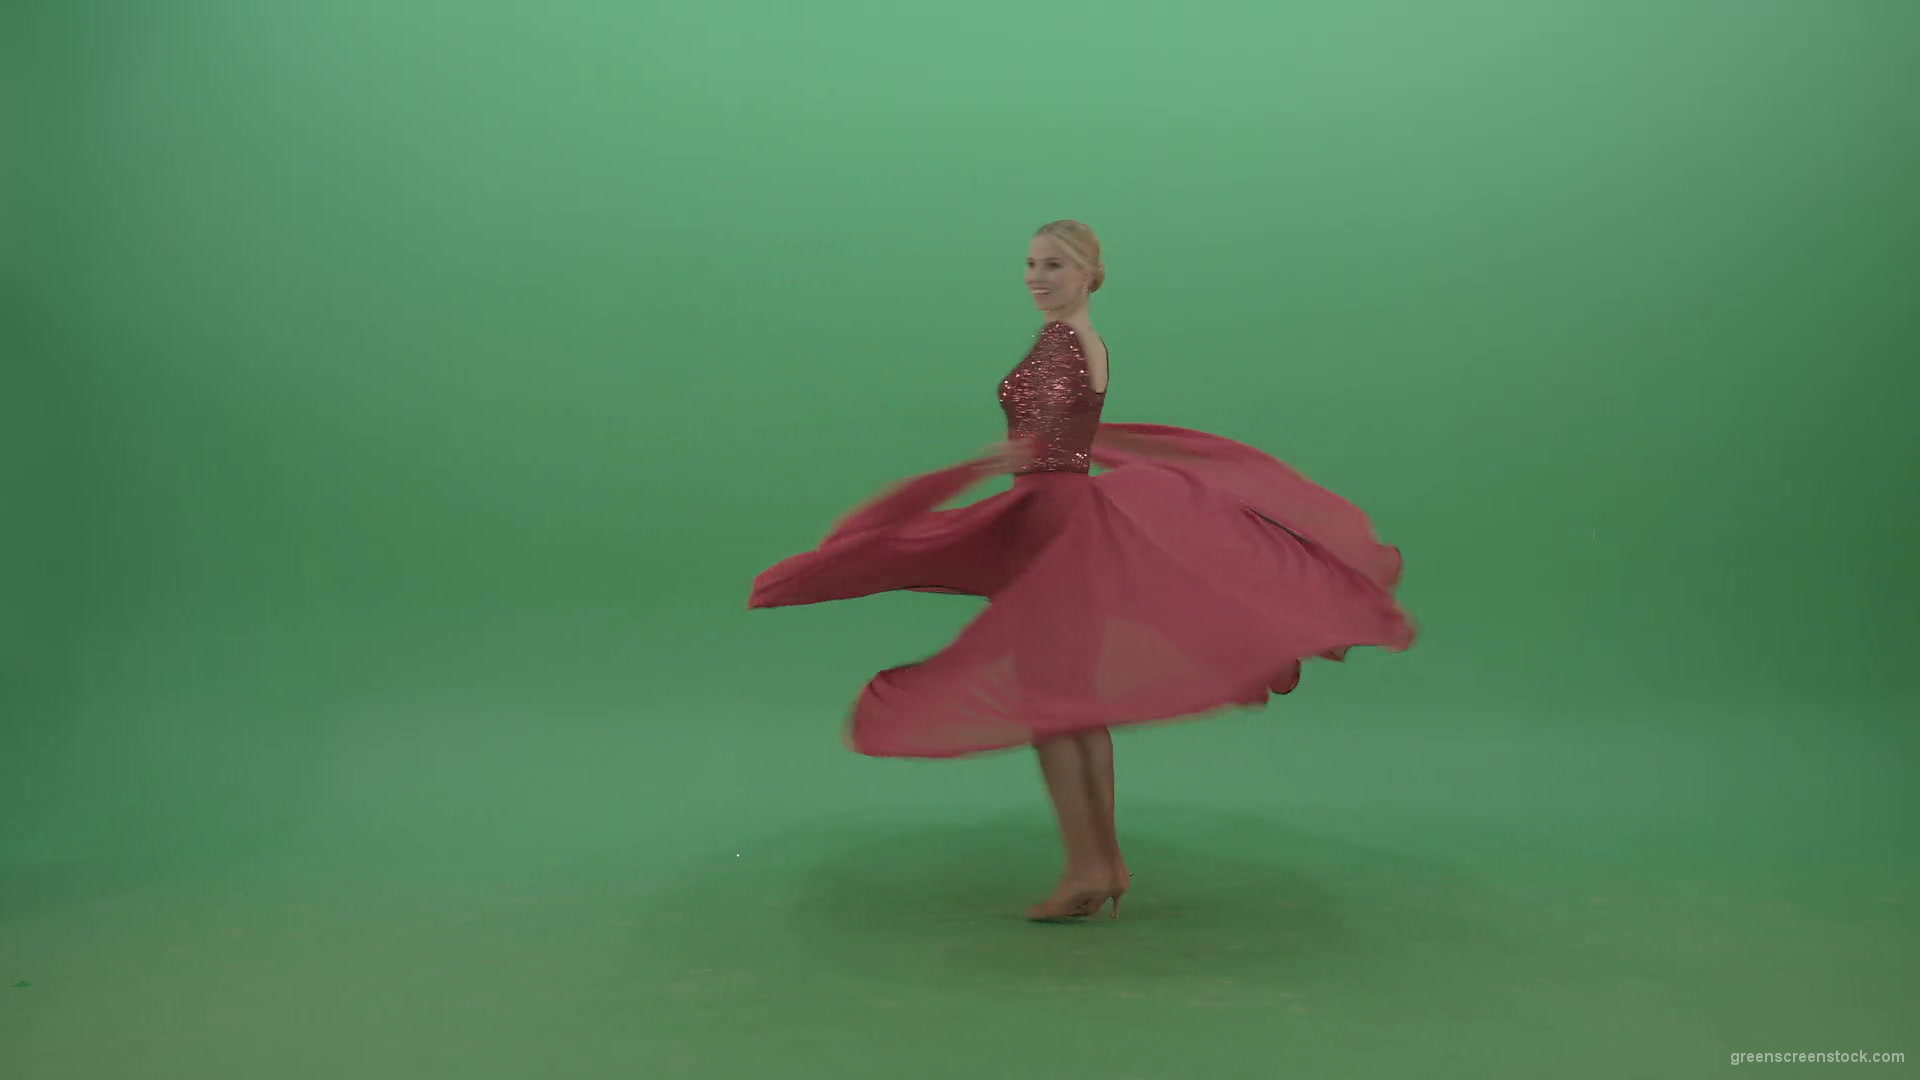 Spinning-woman-in-red-dress-showing-dance-flamenco-moves-over-green-screen-4K-Video-Footage-1920_009 Green Screen Stock